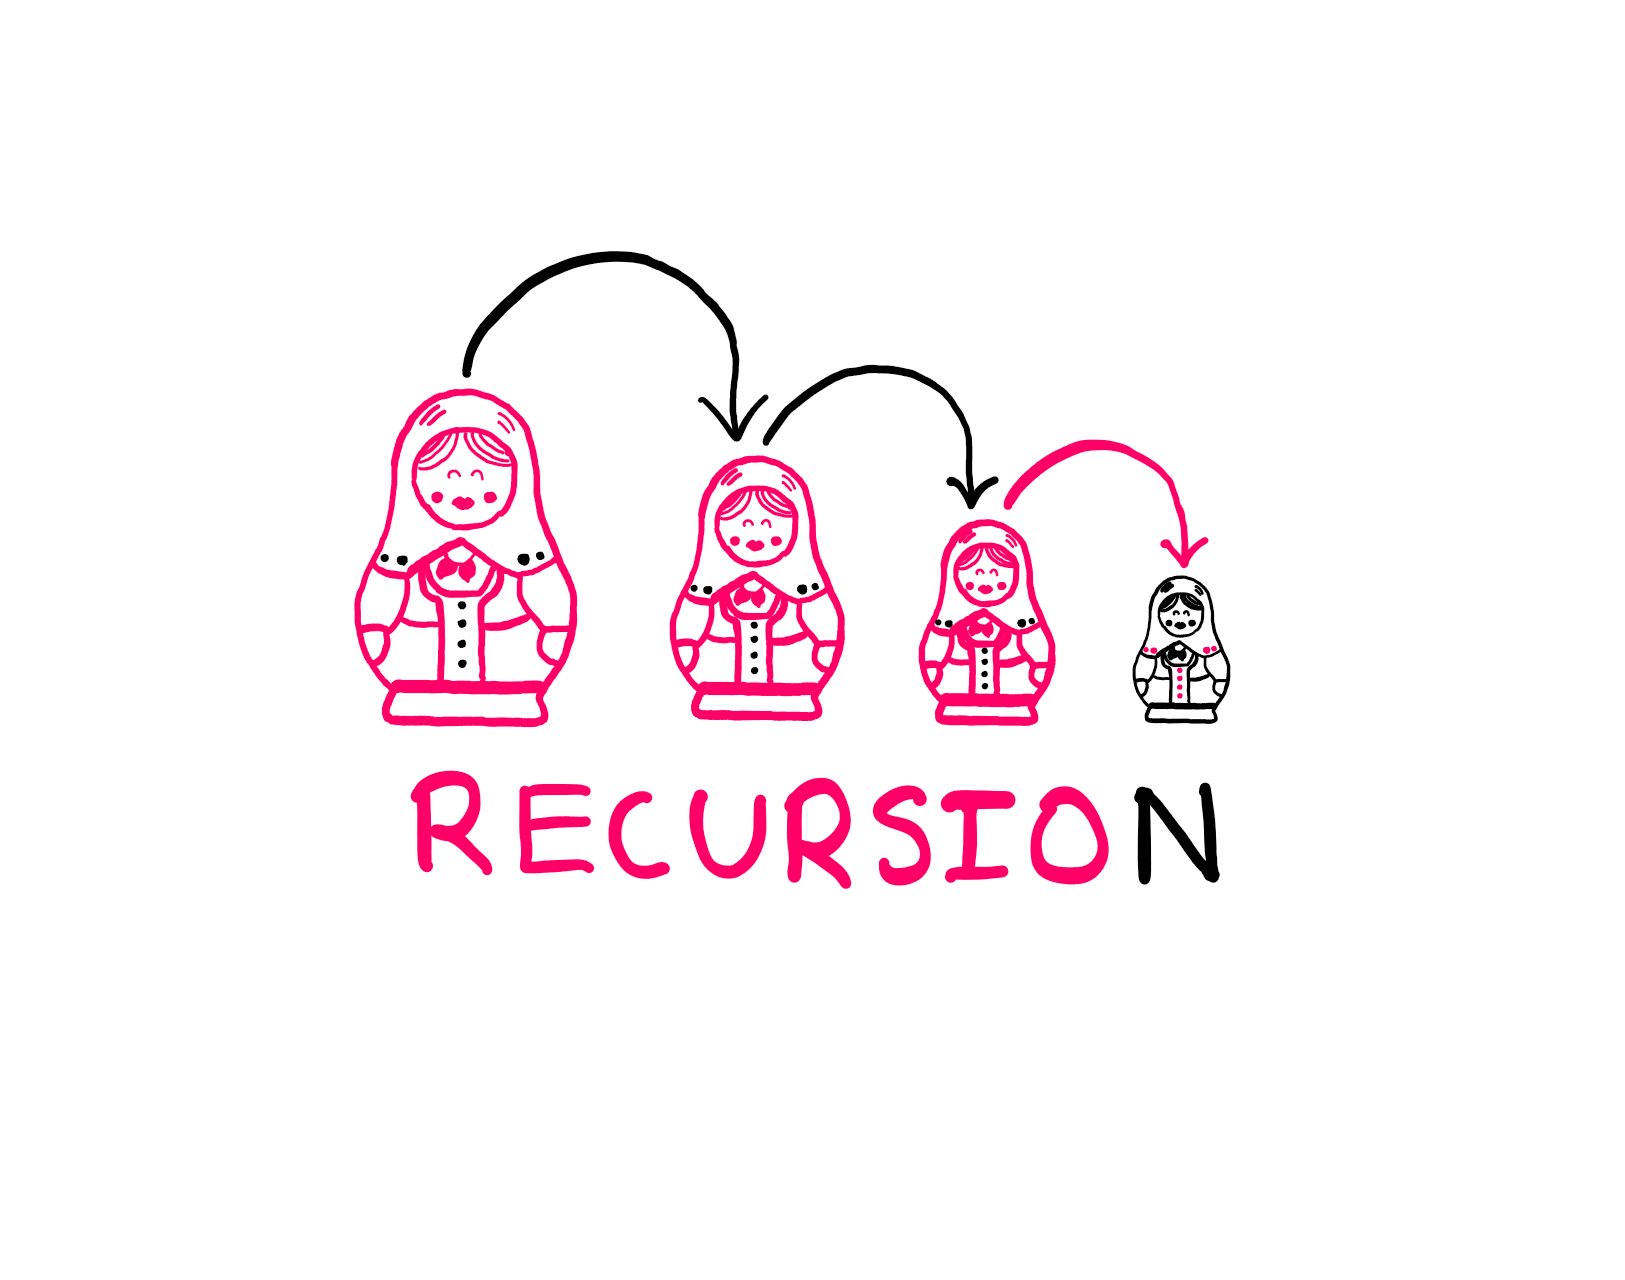 How To Really Understand Recursion - An illustration of four recursive dolls, where the biggest doll on the left opens up to reveal a smaller doll. This doll in turn opens up to reveal an even smaller doll, and so on. Three dolls from left to right are drawn using pink and black dual colour tones. On the extreme right, the last doll uses inversed pink and black colour tones. Below the dolls, the text "RECURSION" is written in all pink, except "N", which is in black.